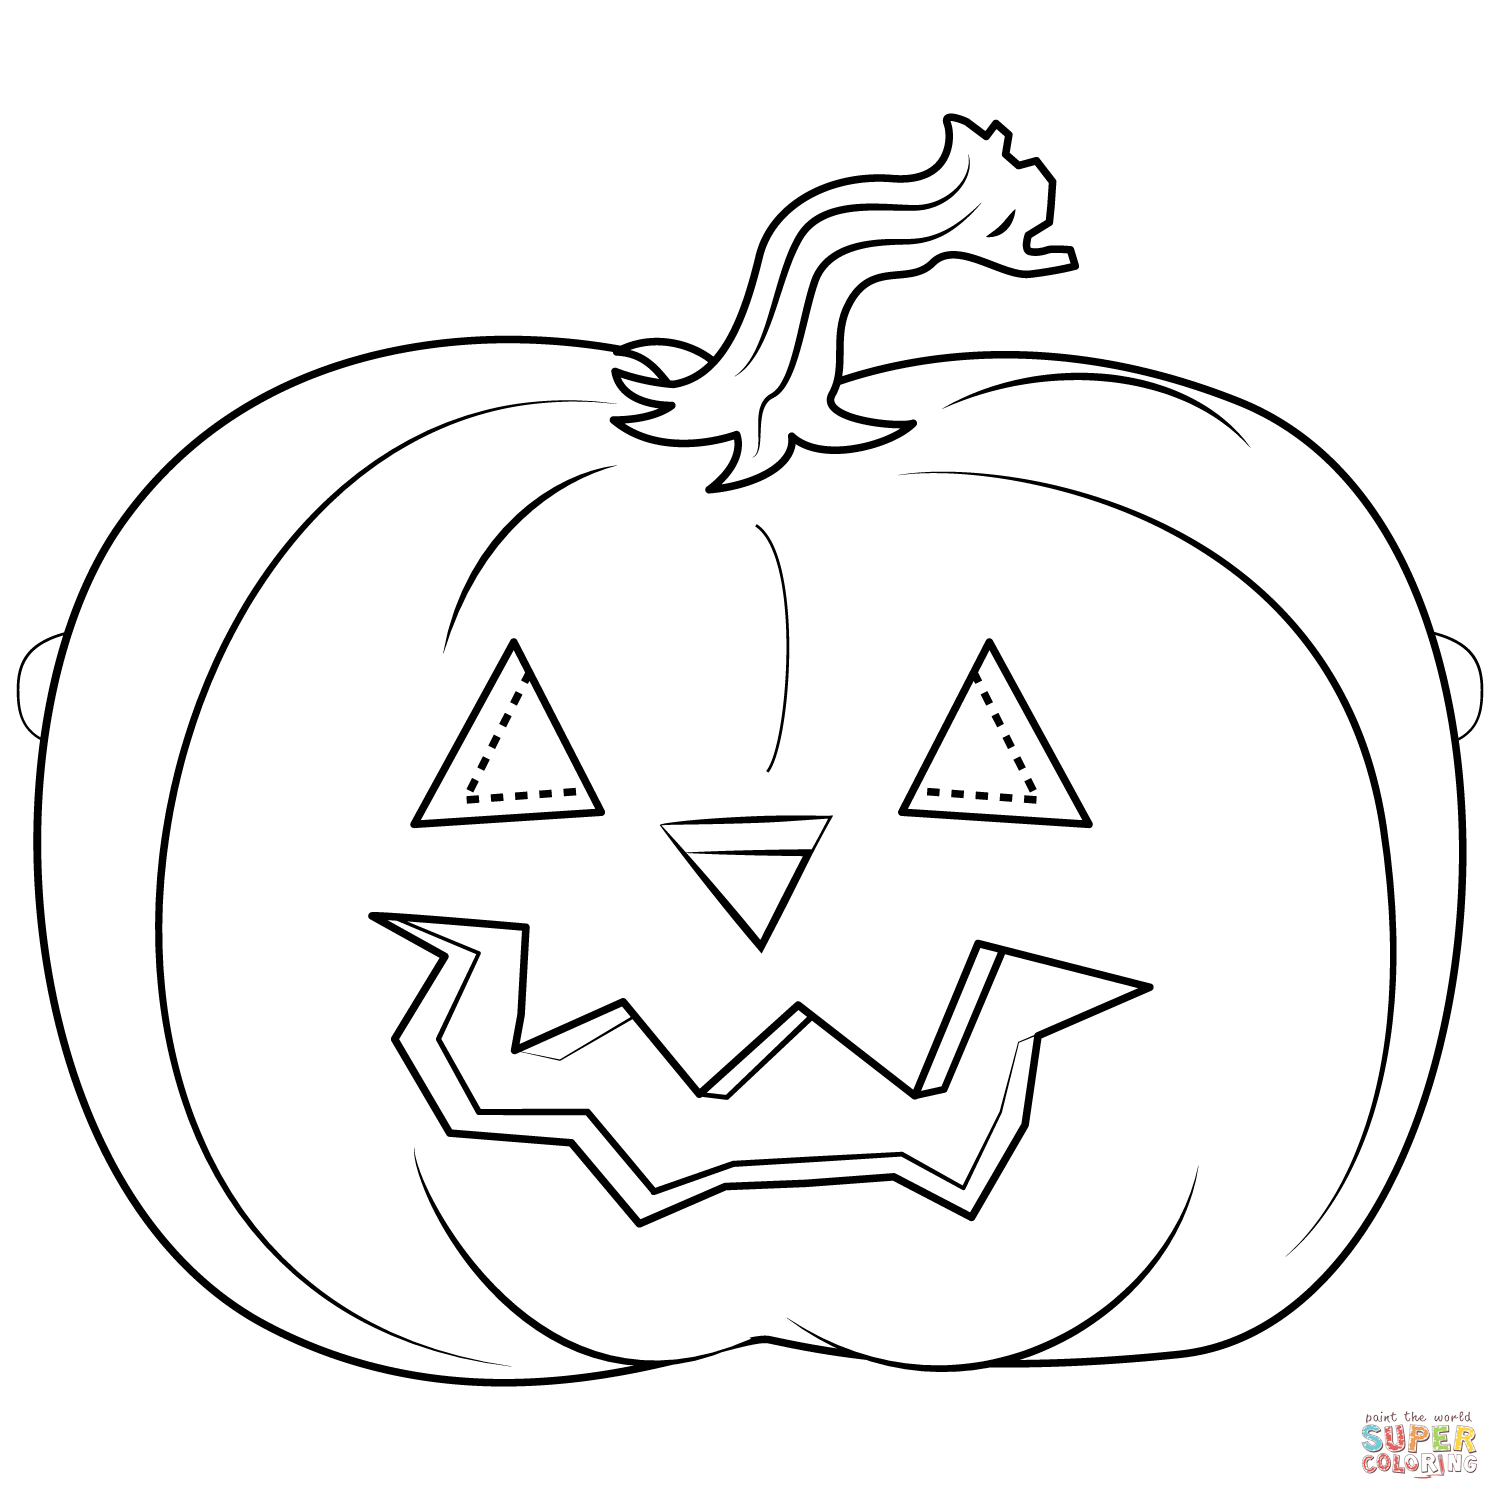 Pumpkin mask coloring page free printable coloring pages